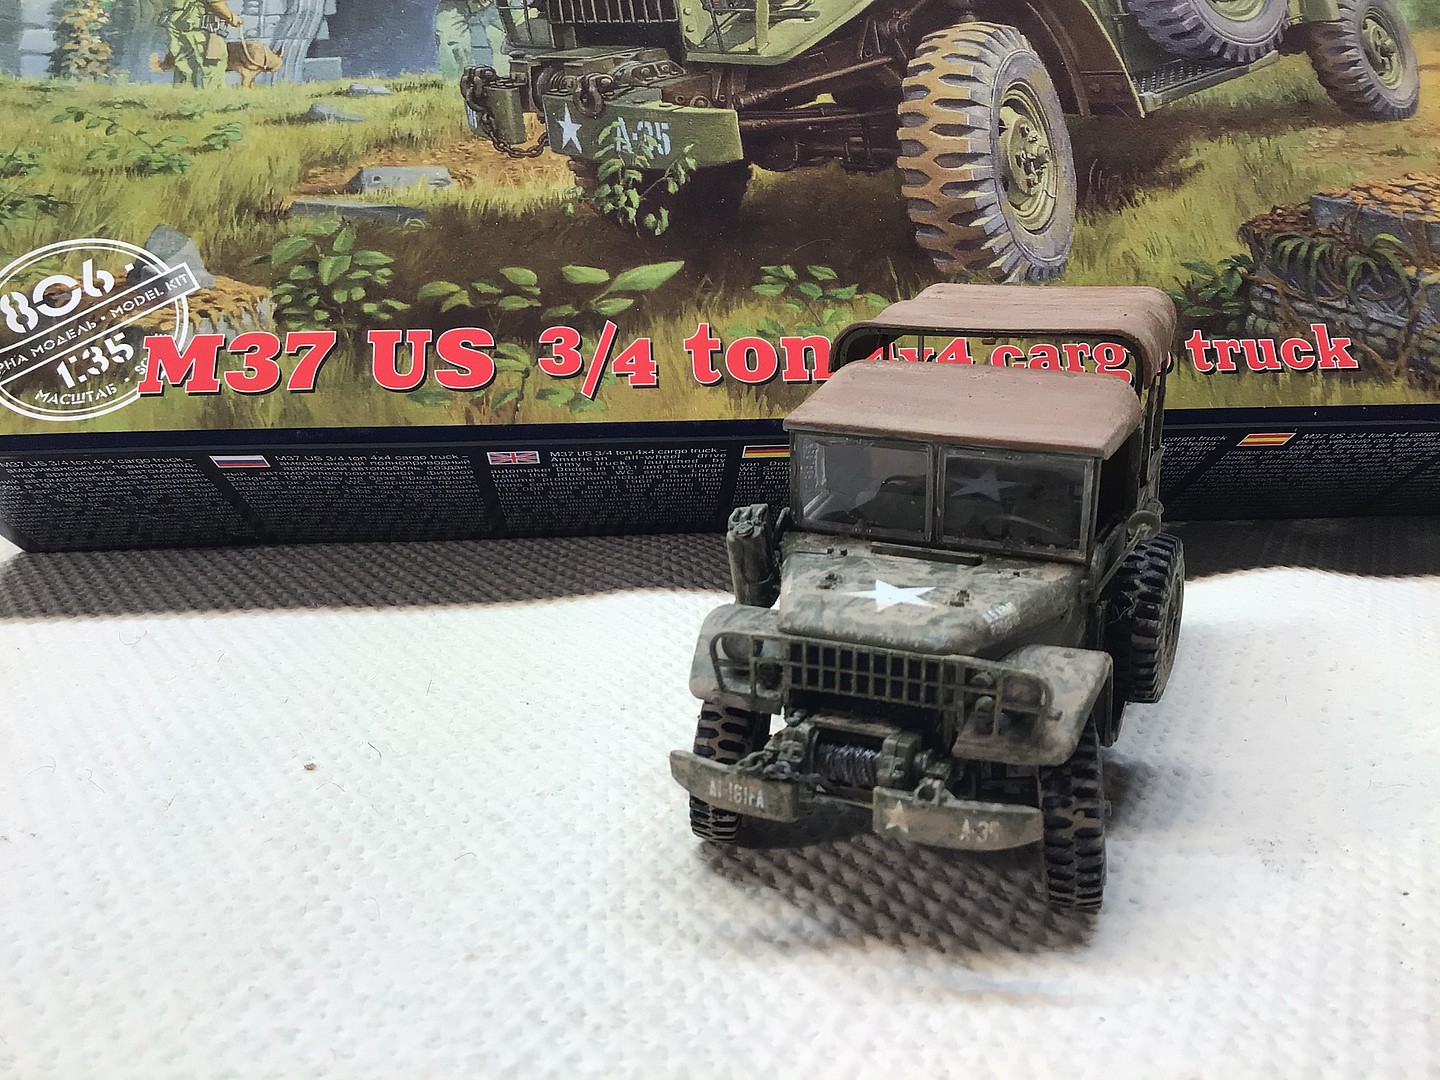 Details about   Roden 809 American Truck M-42 Scale Plastic Model Kit 1/35